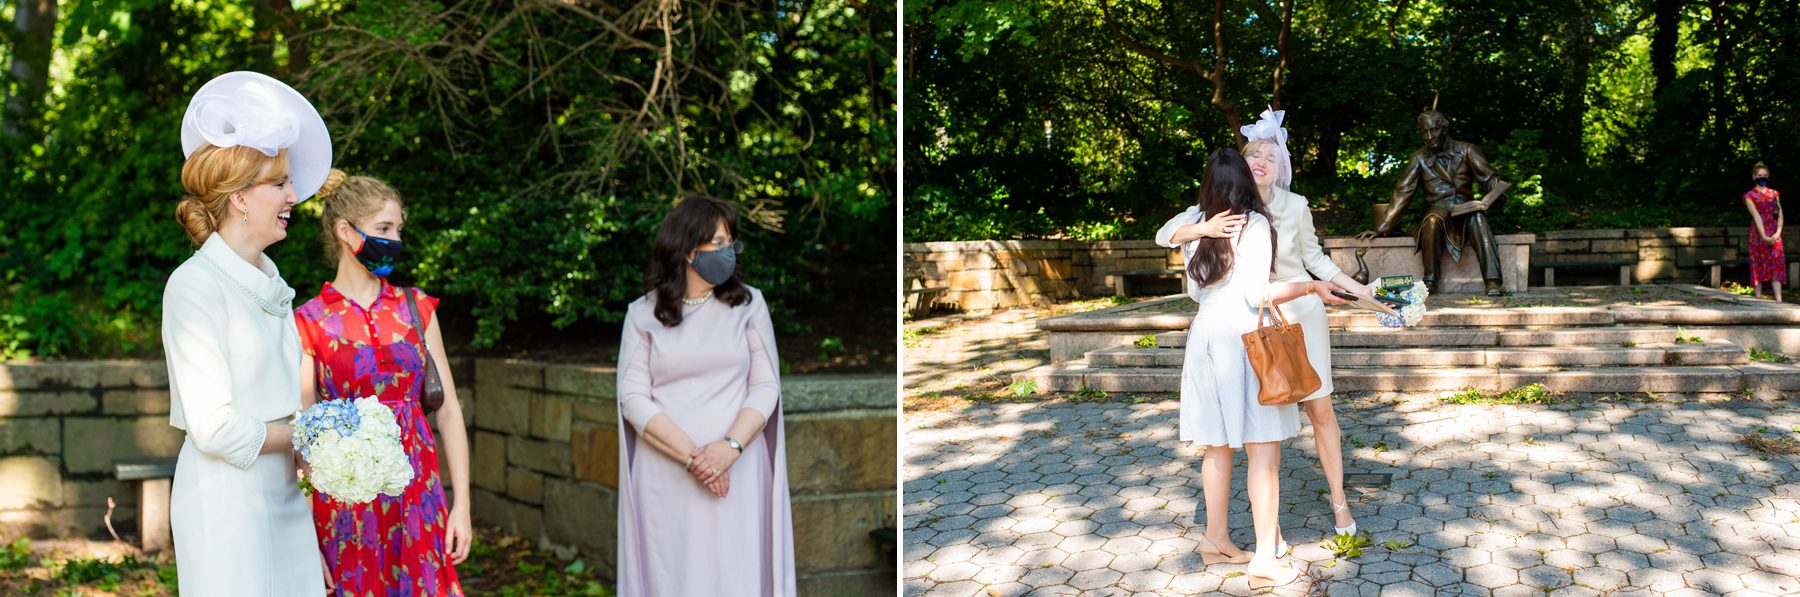 Intimate Wedding in Central Park